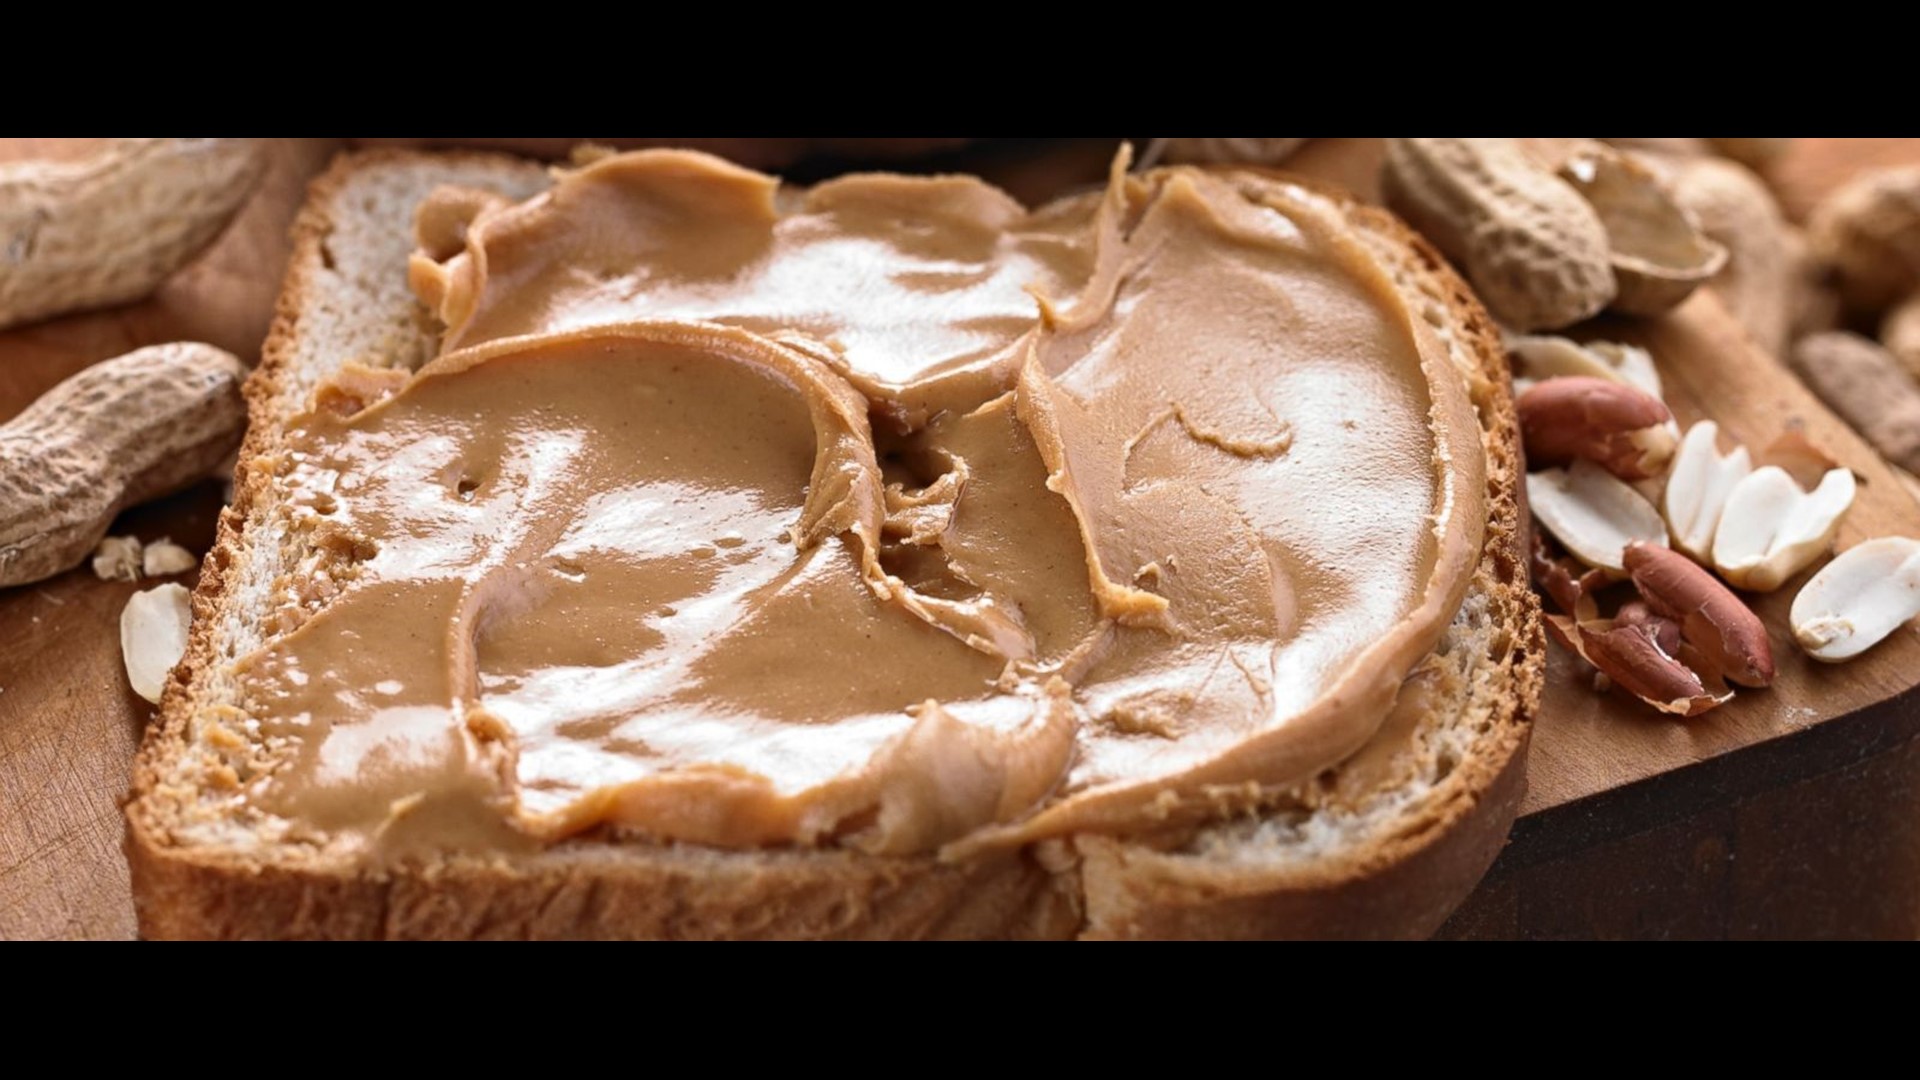 Over 40 varieties of Jif peanut butter are involved in the recall.